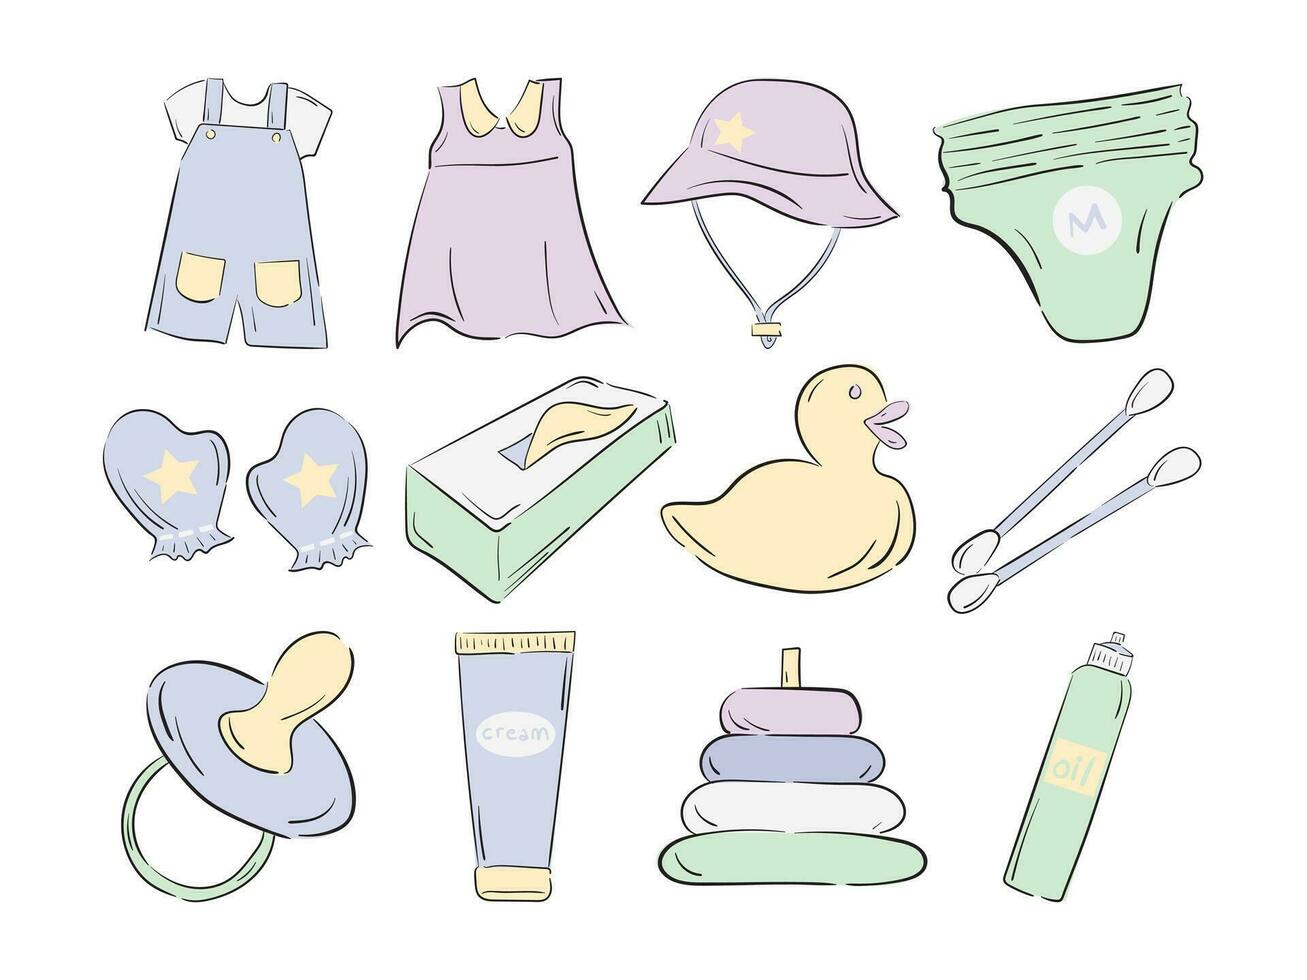 Cute baby and newborn equipment collection, Vector illustration doodle style